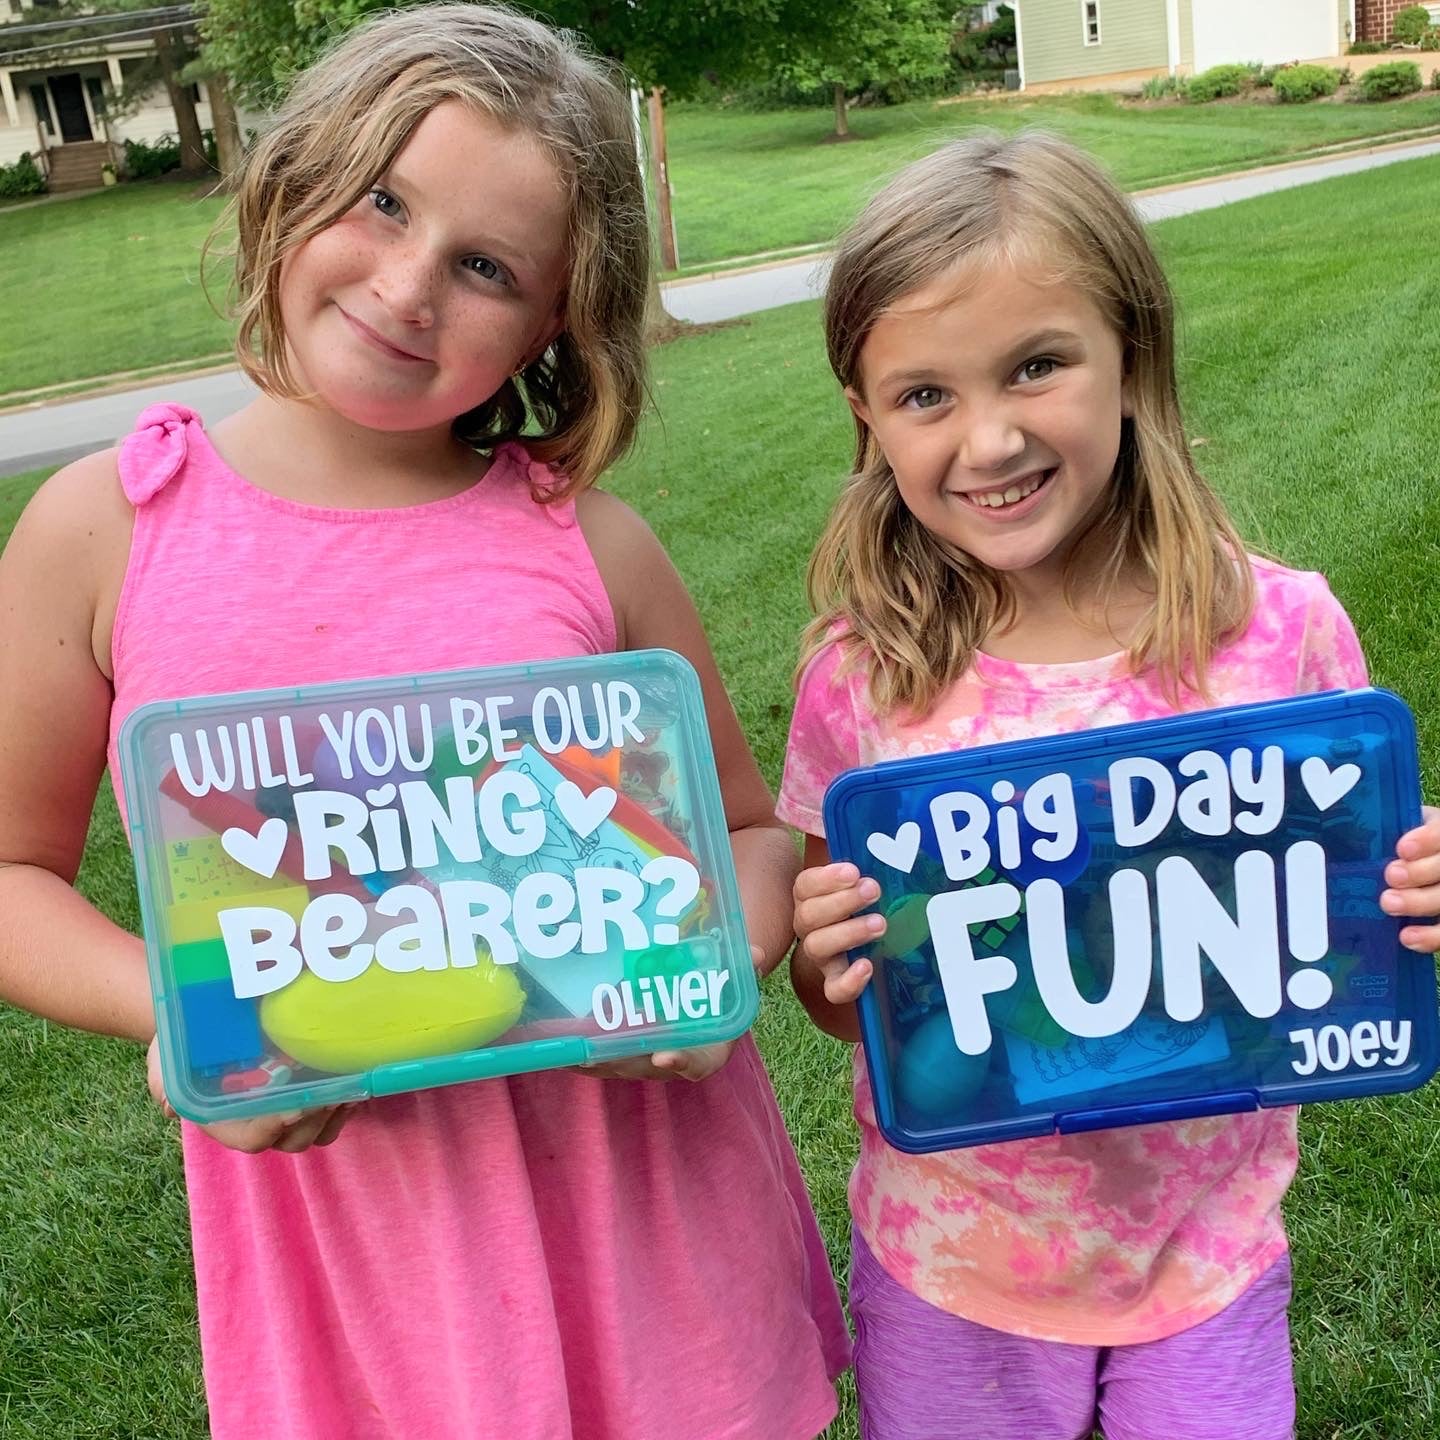 Two young girls holding wedding themed busy boxes. One girl holding a turquoise box with will you be our ring bearer question on the front. Other girl holding a dark blue box with big day fun and the name Joey on it.